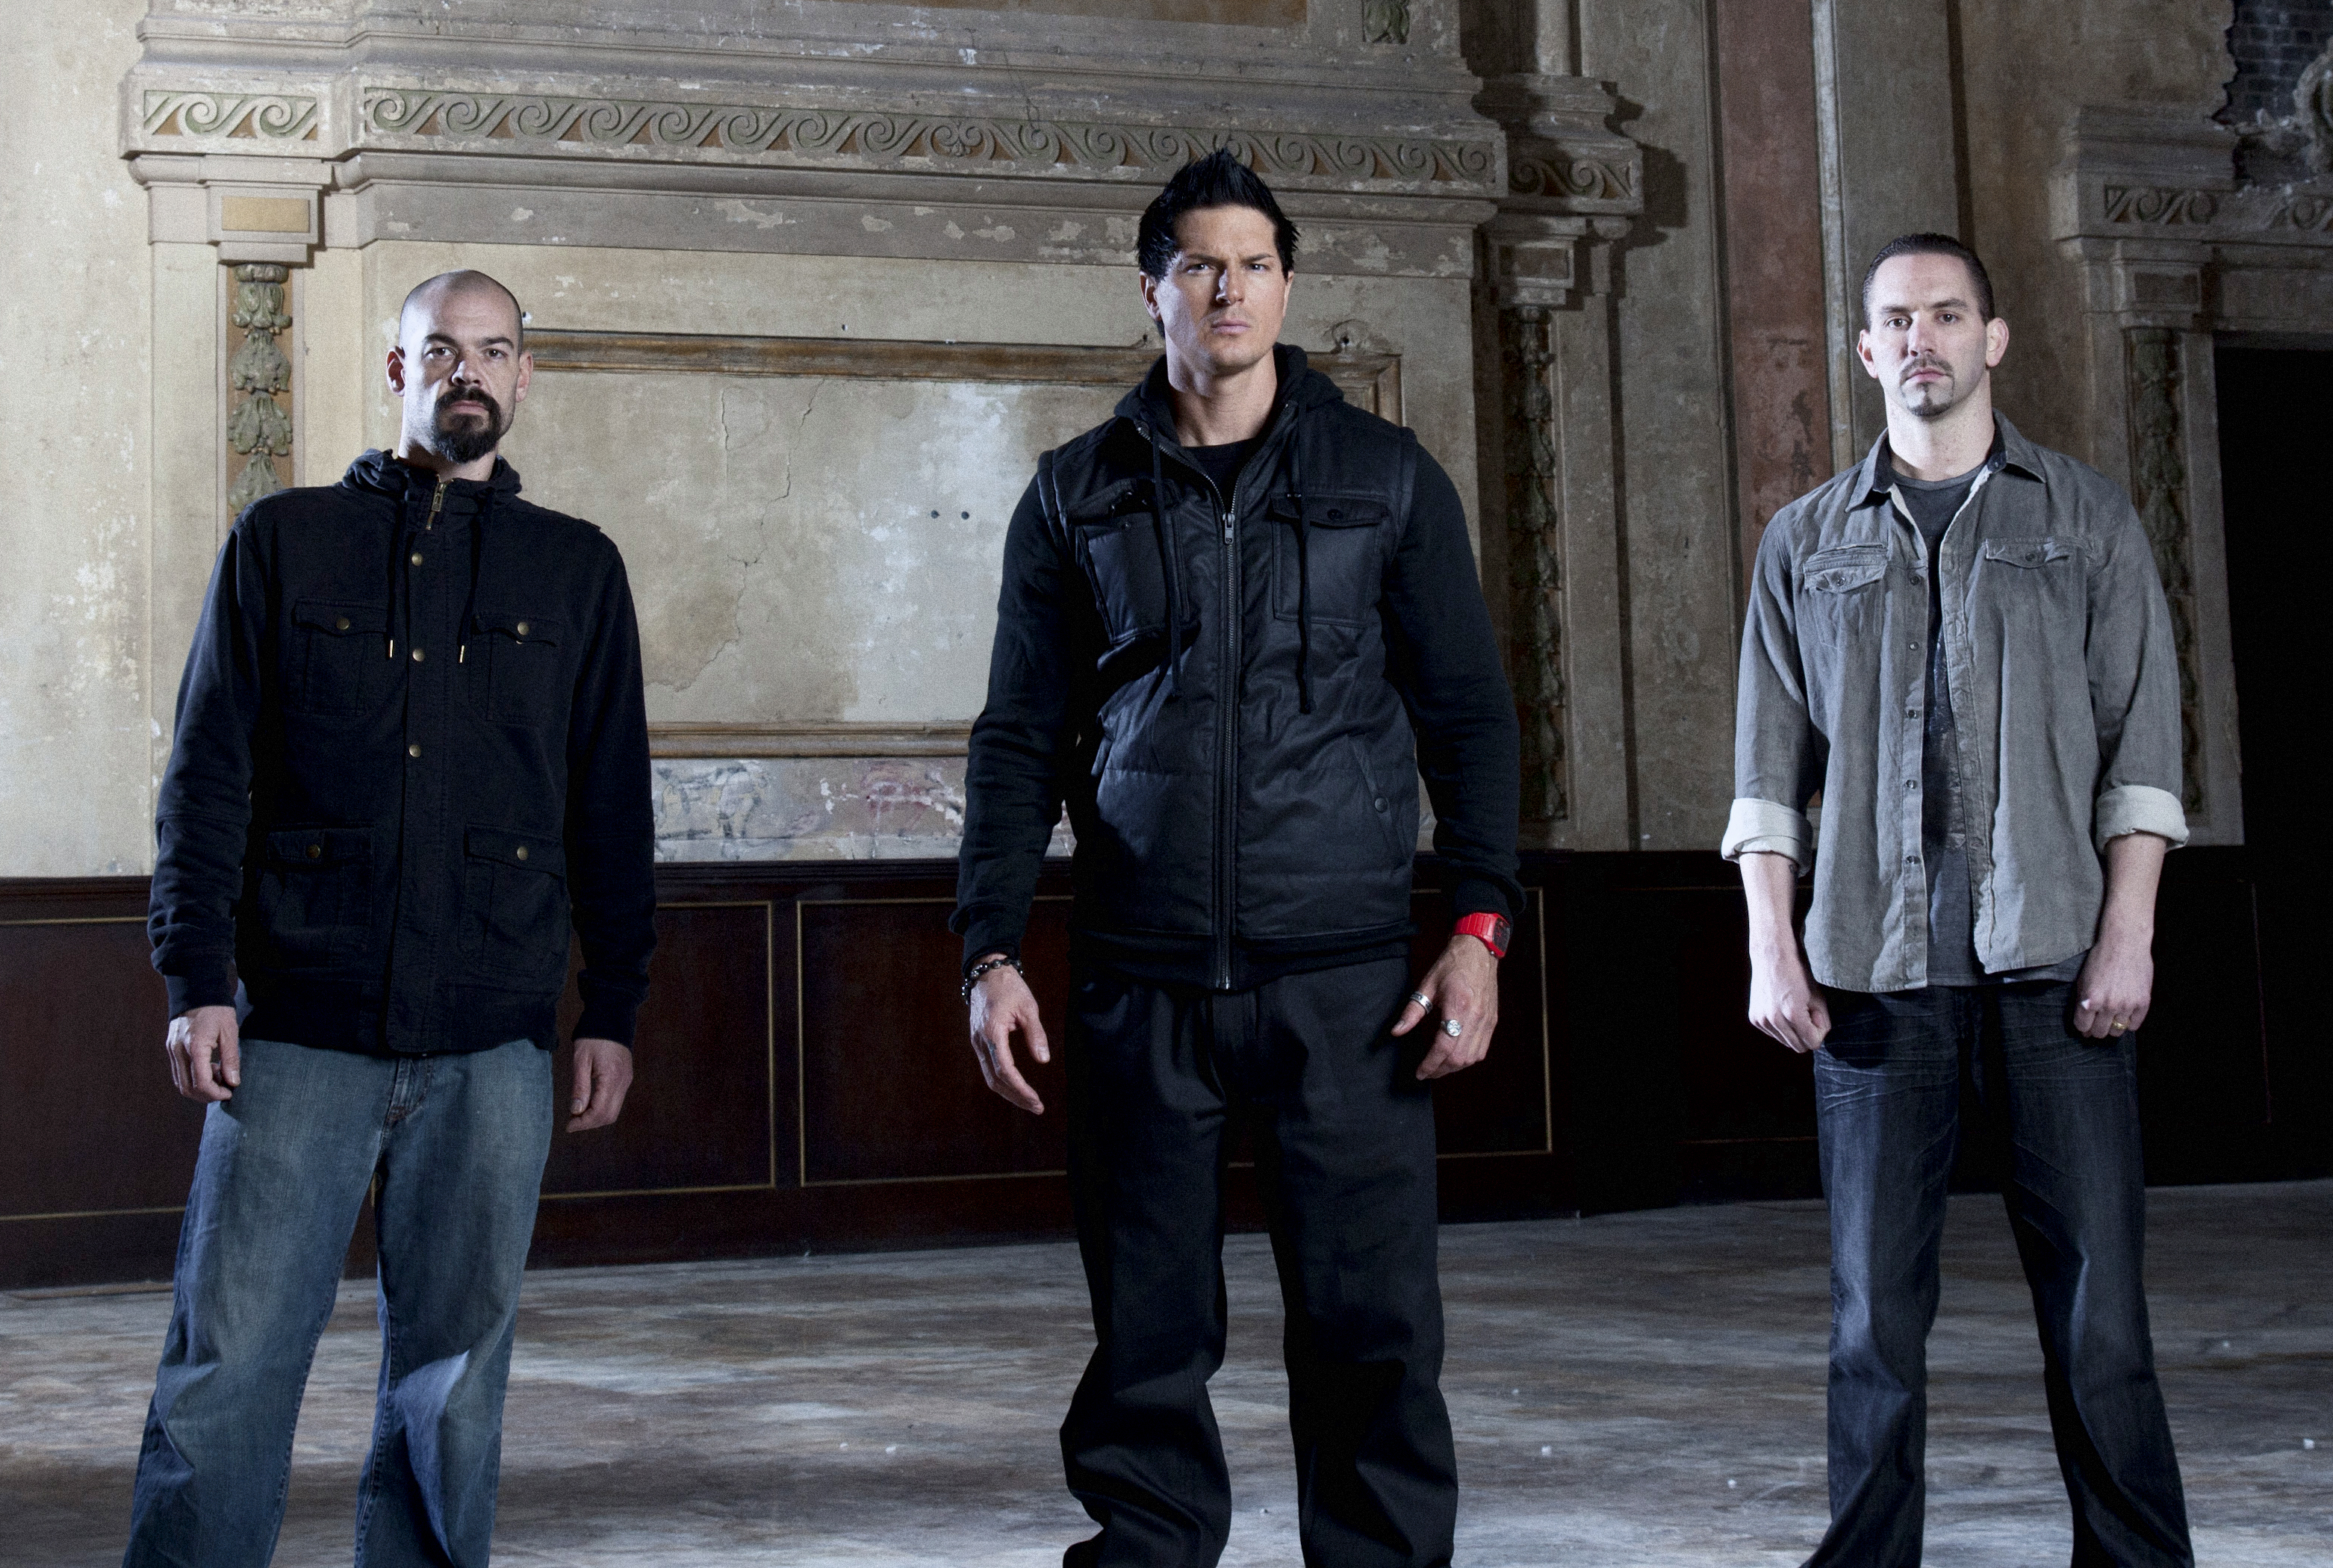 It’s been a long journey, so many ghost adventures doing our investigations...